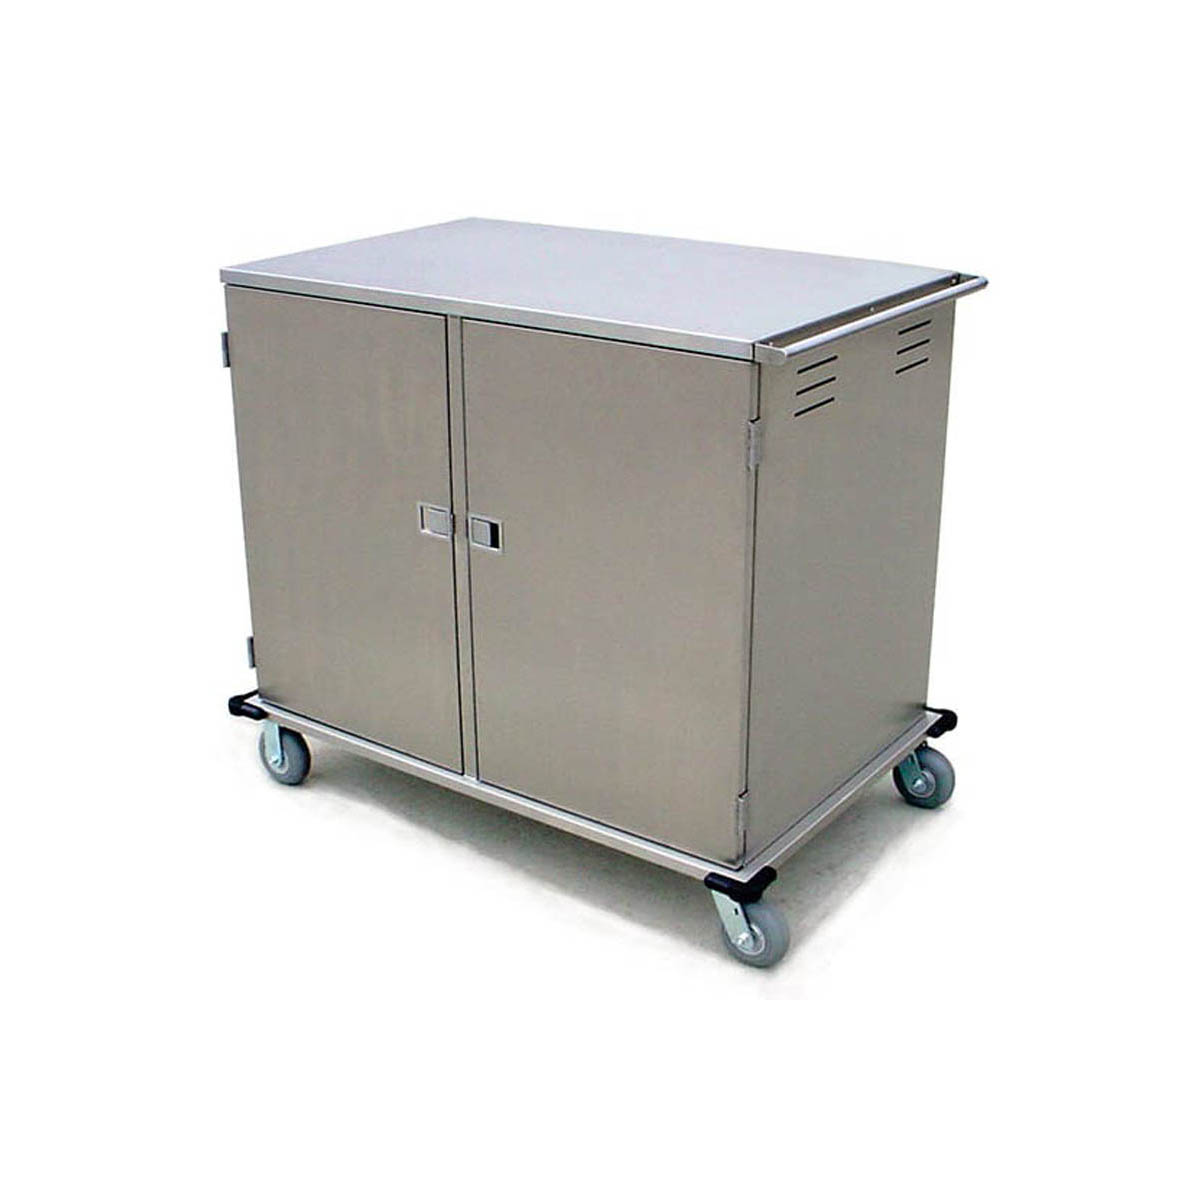 Lakeside 5628 Elite Series Enclosed Meal Tray Delivery Cart, Low Profile- 28 Tray Capacity